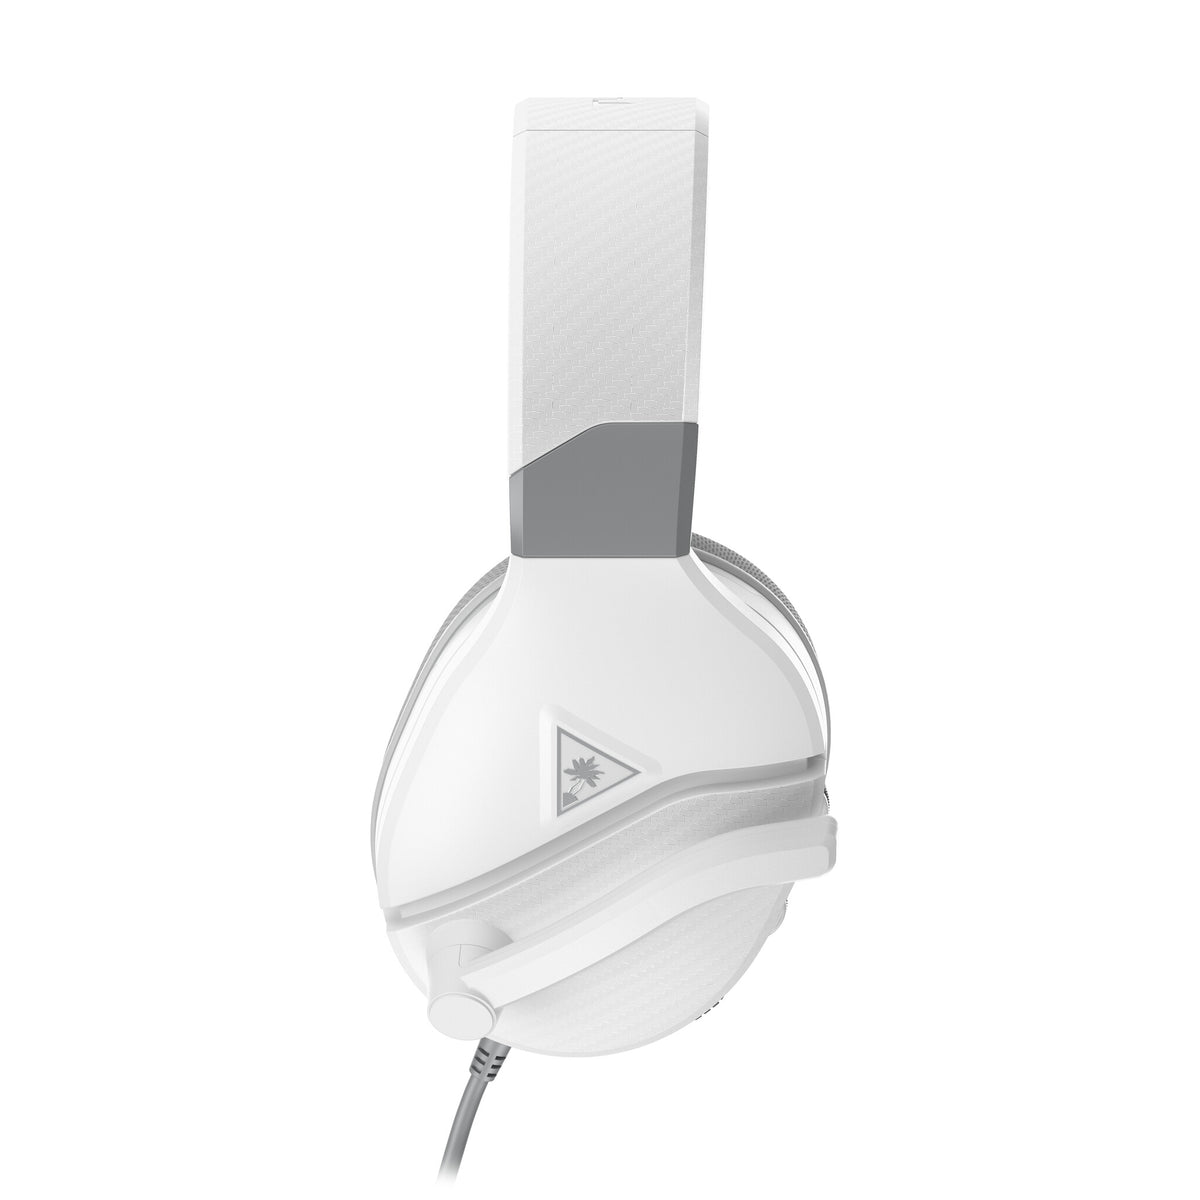 Turtle Beach Recon 200 (Gen 2) - USB Type-C Wired Gaming Headset in Grey / White